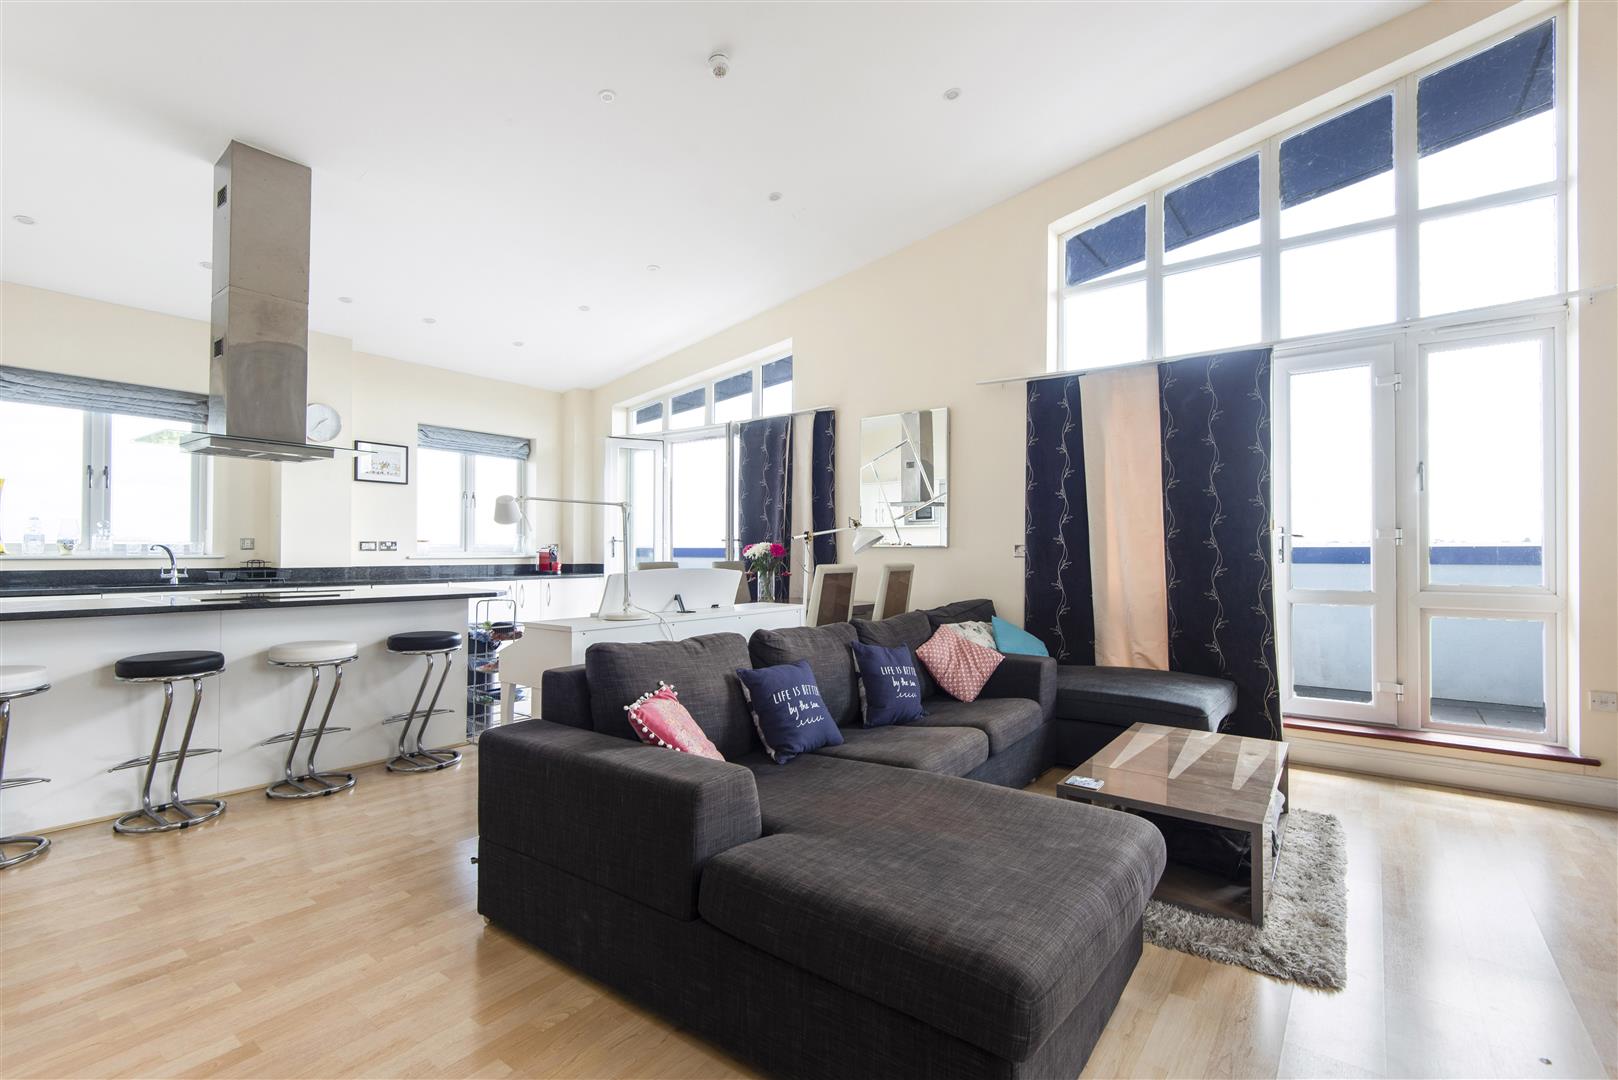 Luscinia View Napier Road house for sale in Reading